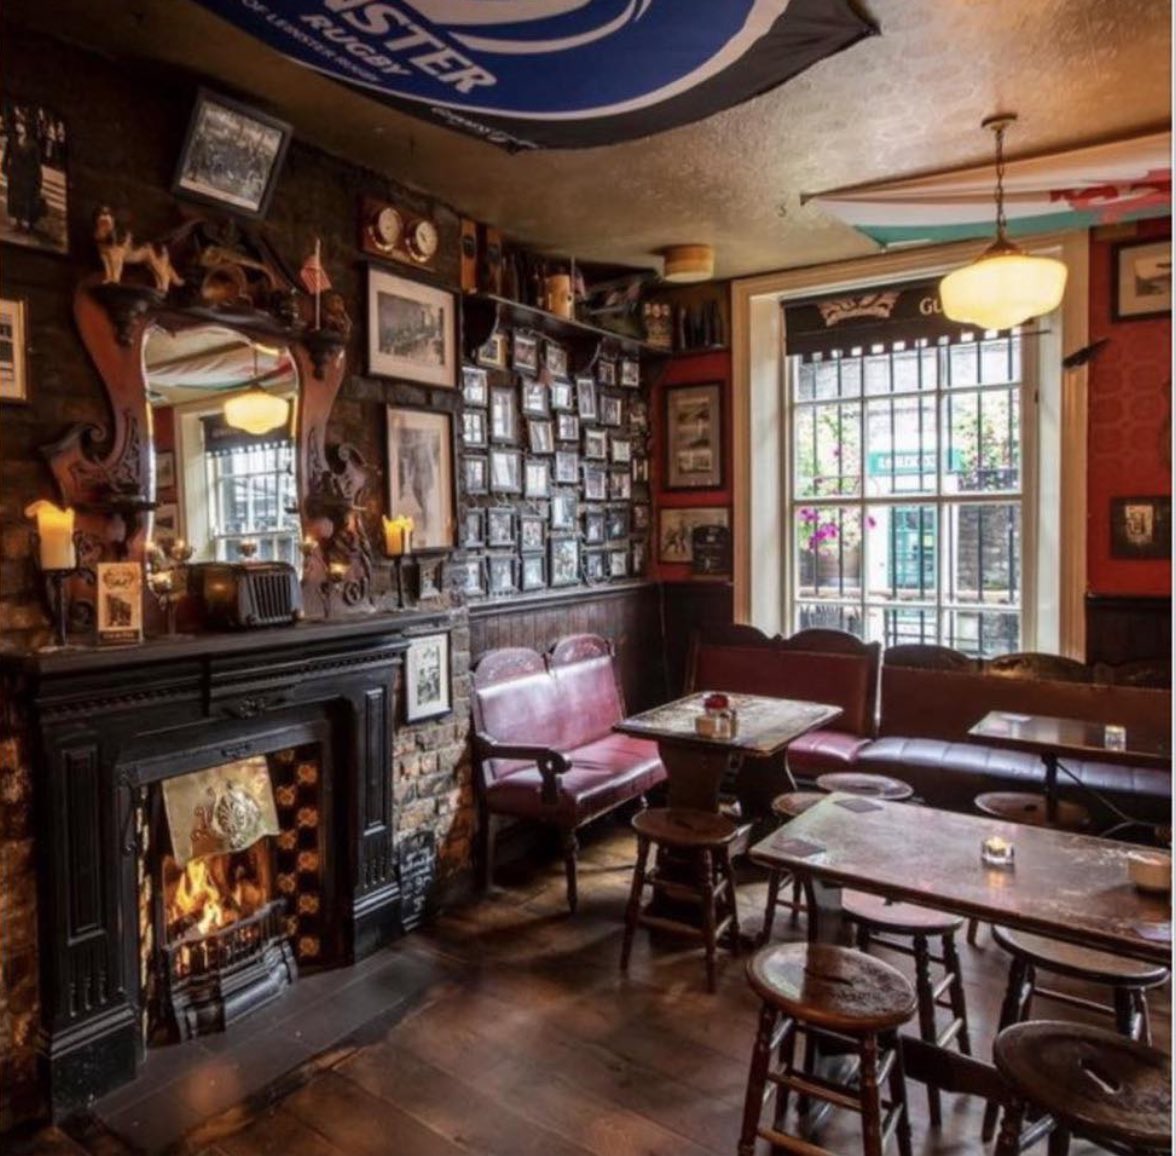 Escape the cold of the snow today with a seat by the fire in The Brazen Head 🔥❄️

#ireland #snow #snowday #dublin #dublinpub #thebrazenhead #thebrazenheaddublin